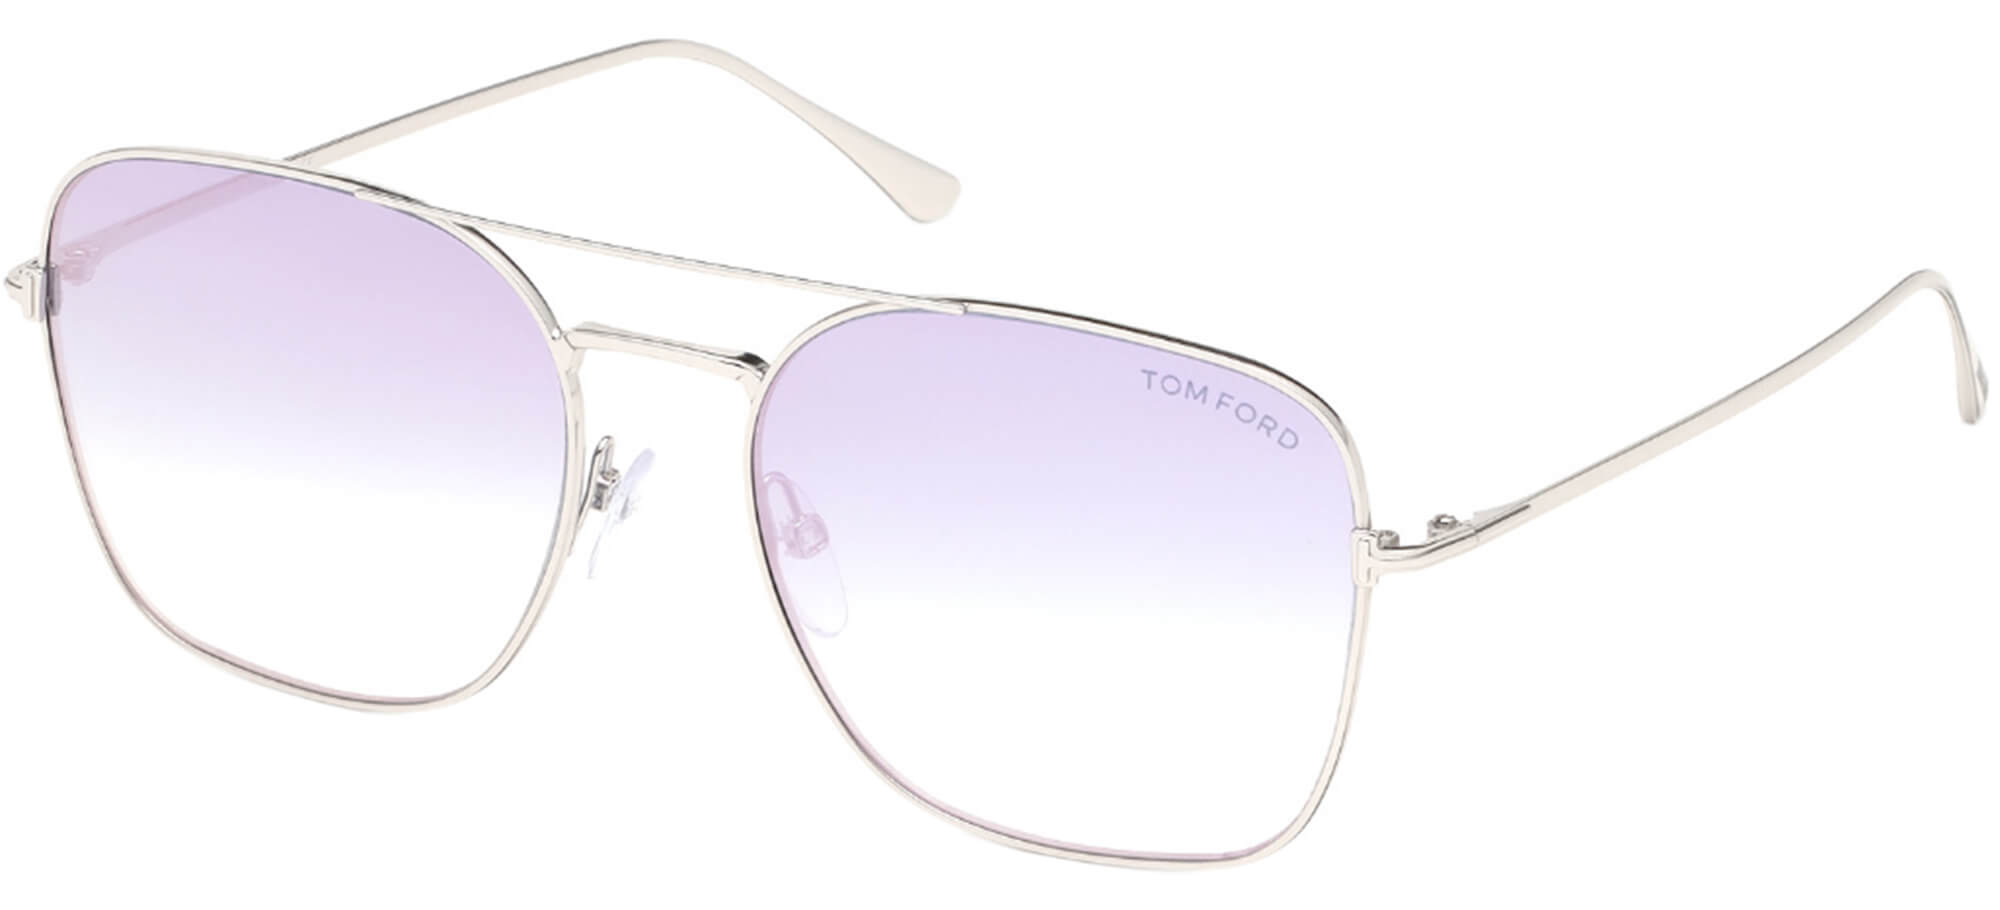 Tom FordDYLAN-02 FT 0680Silver/lilac Shaded (16Z E)